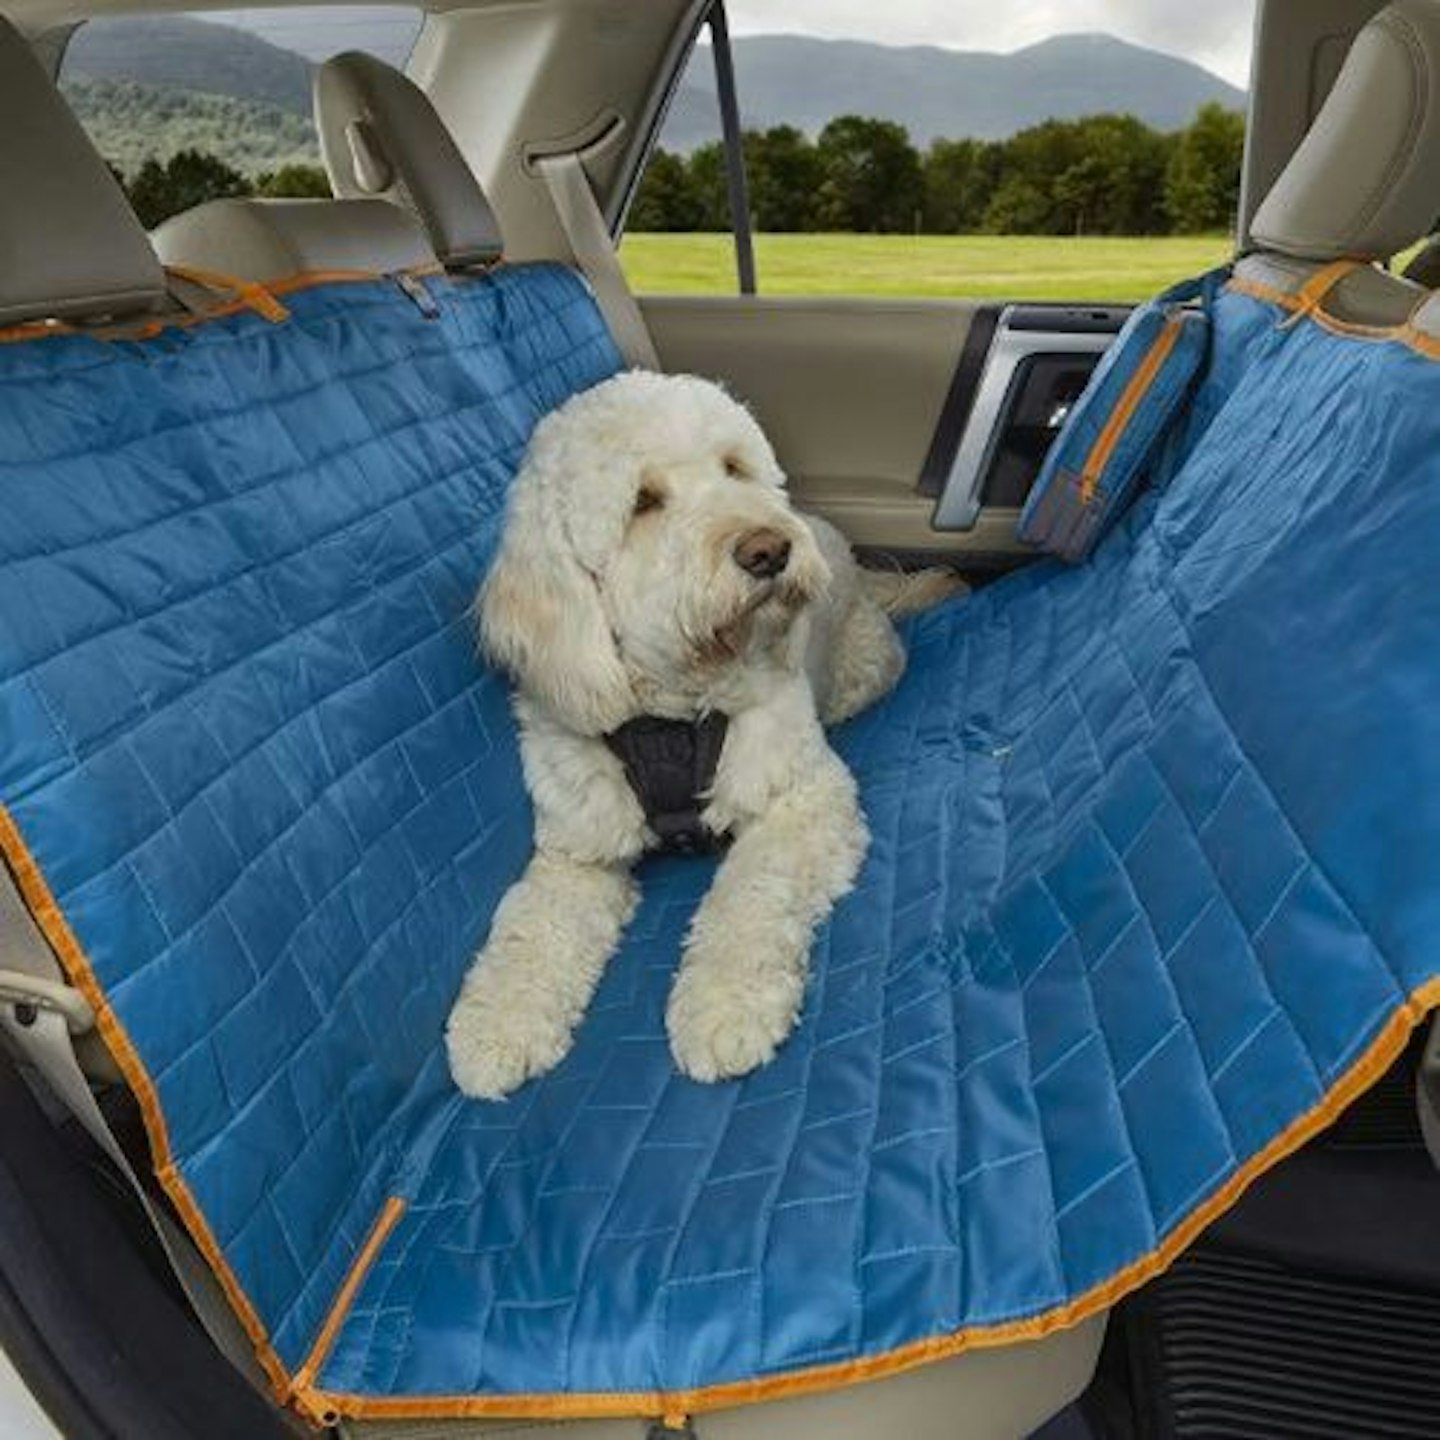 Kurgo Loft Hammock, Dog Car Seat Protector, Water- and Stain-Resistant, Secure Fit, Reversible, Blue/Grey